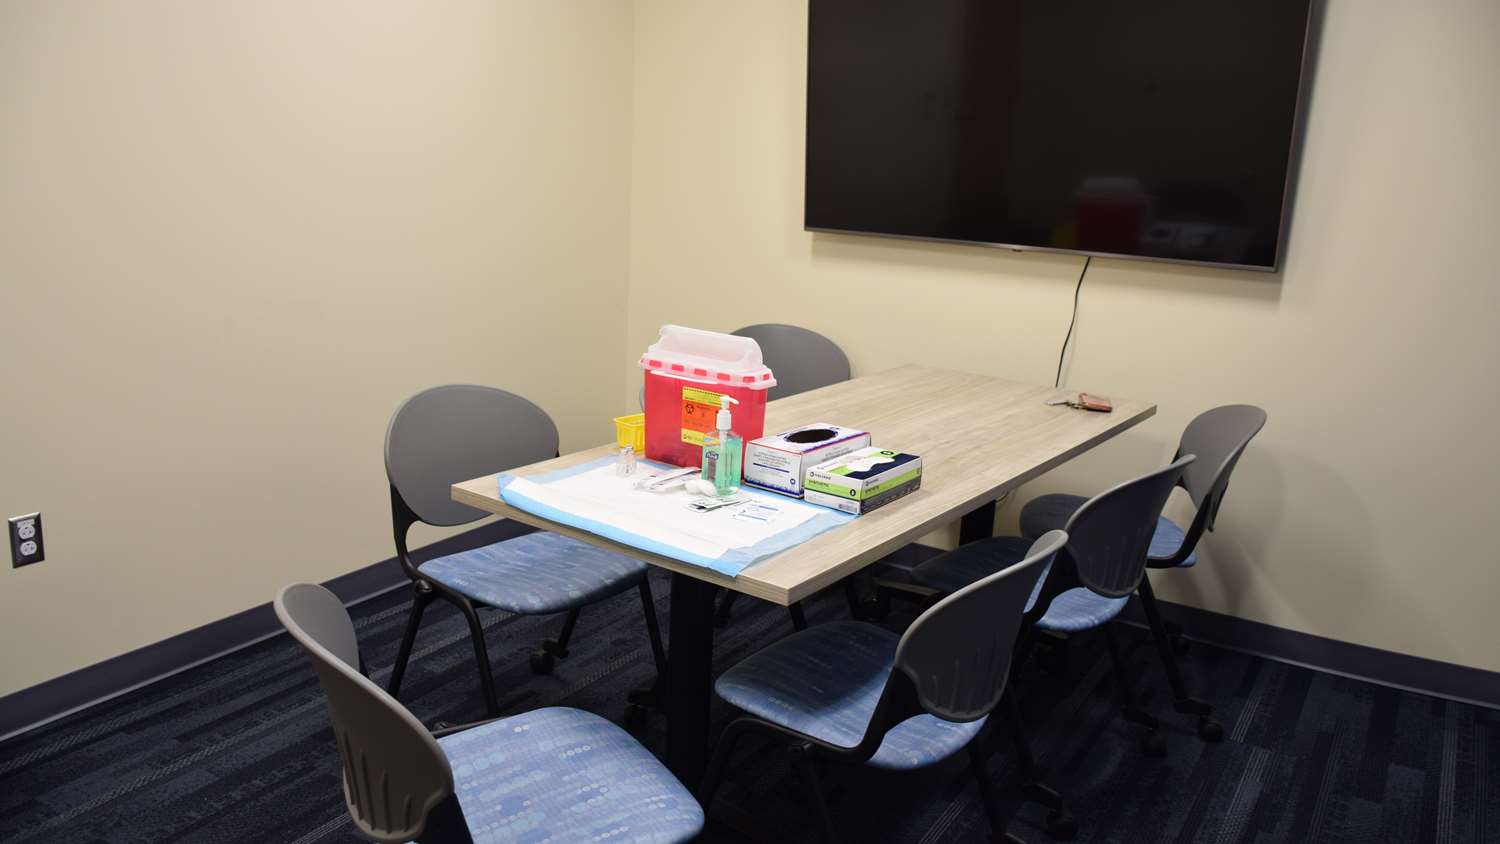 A table in a yellow room with a tv screen on the wall and immunization supplies on the table.